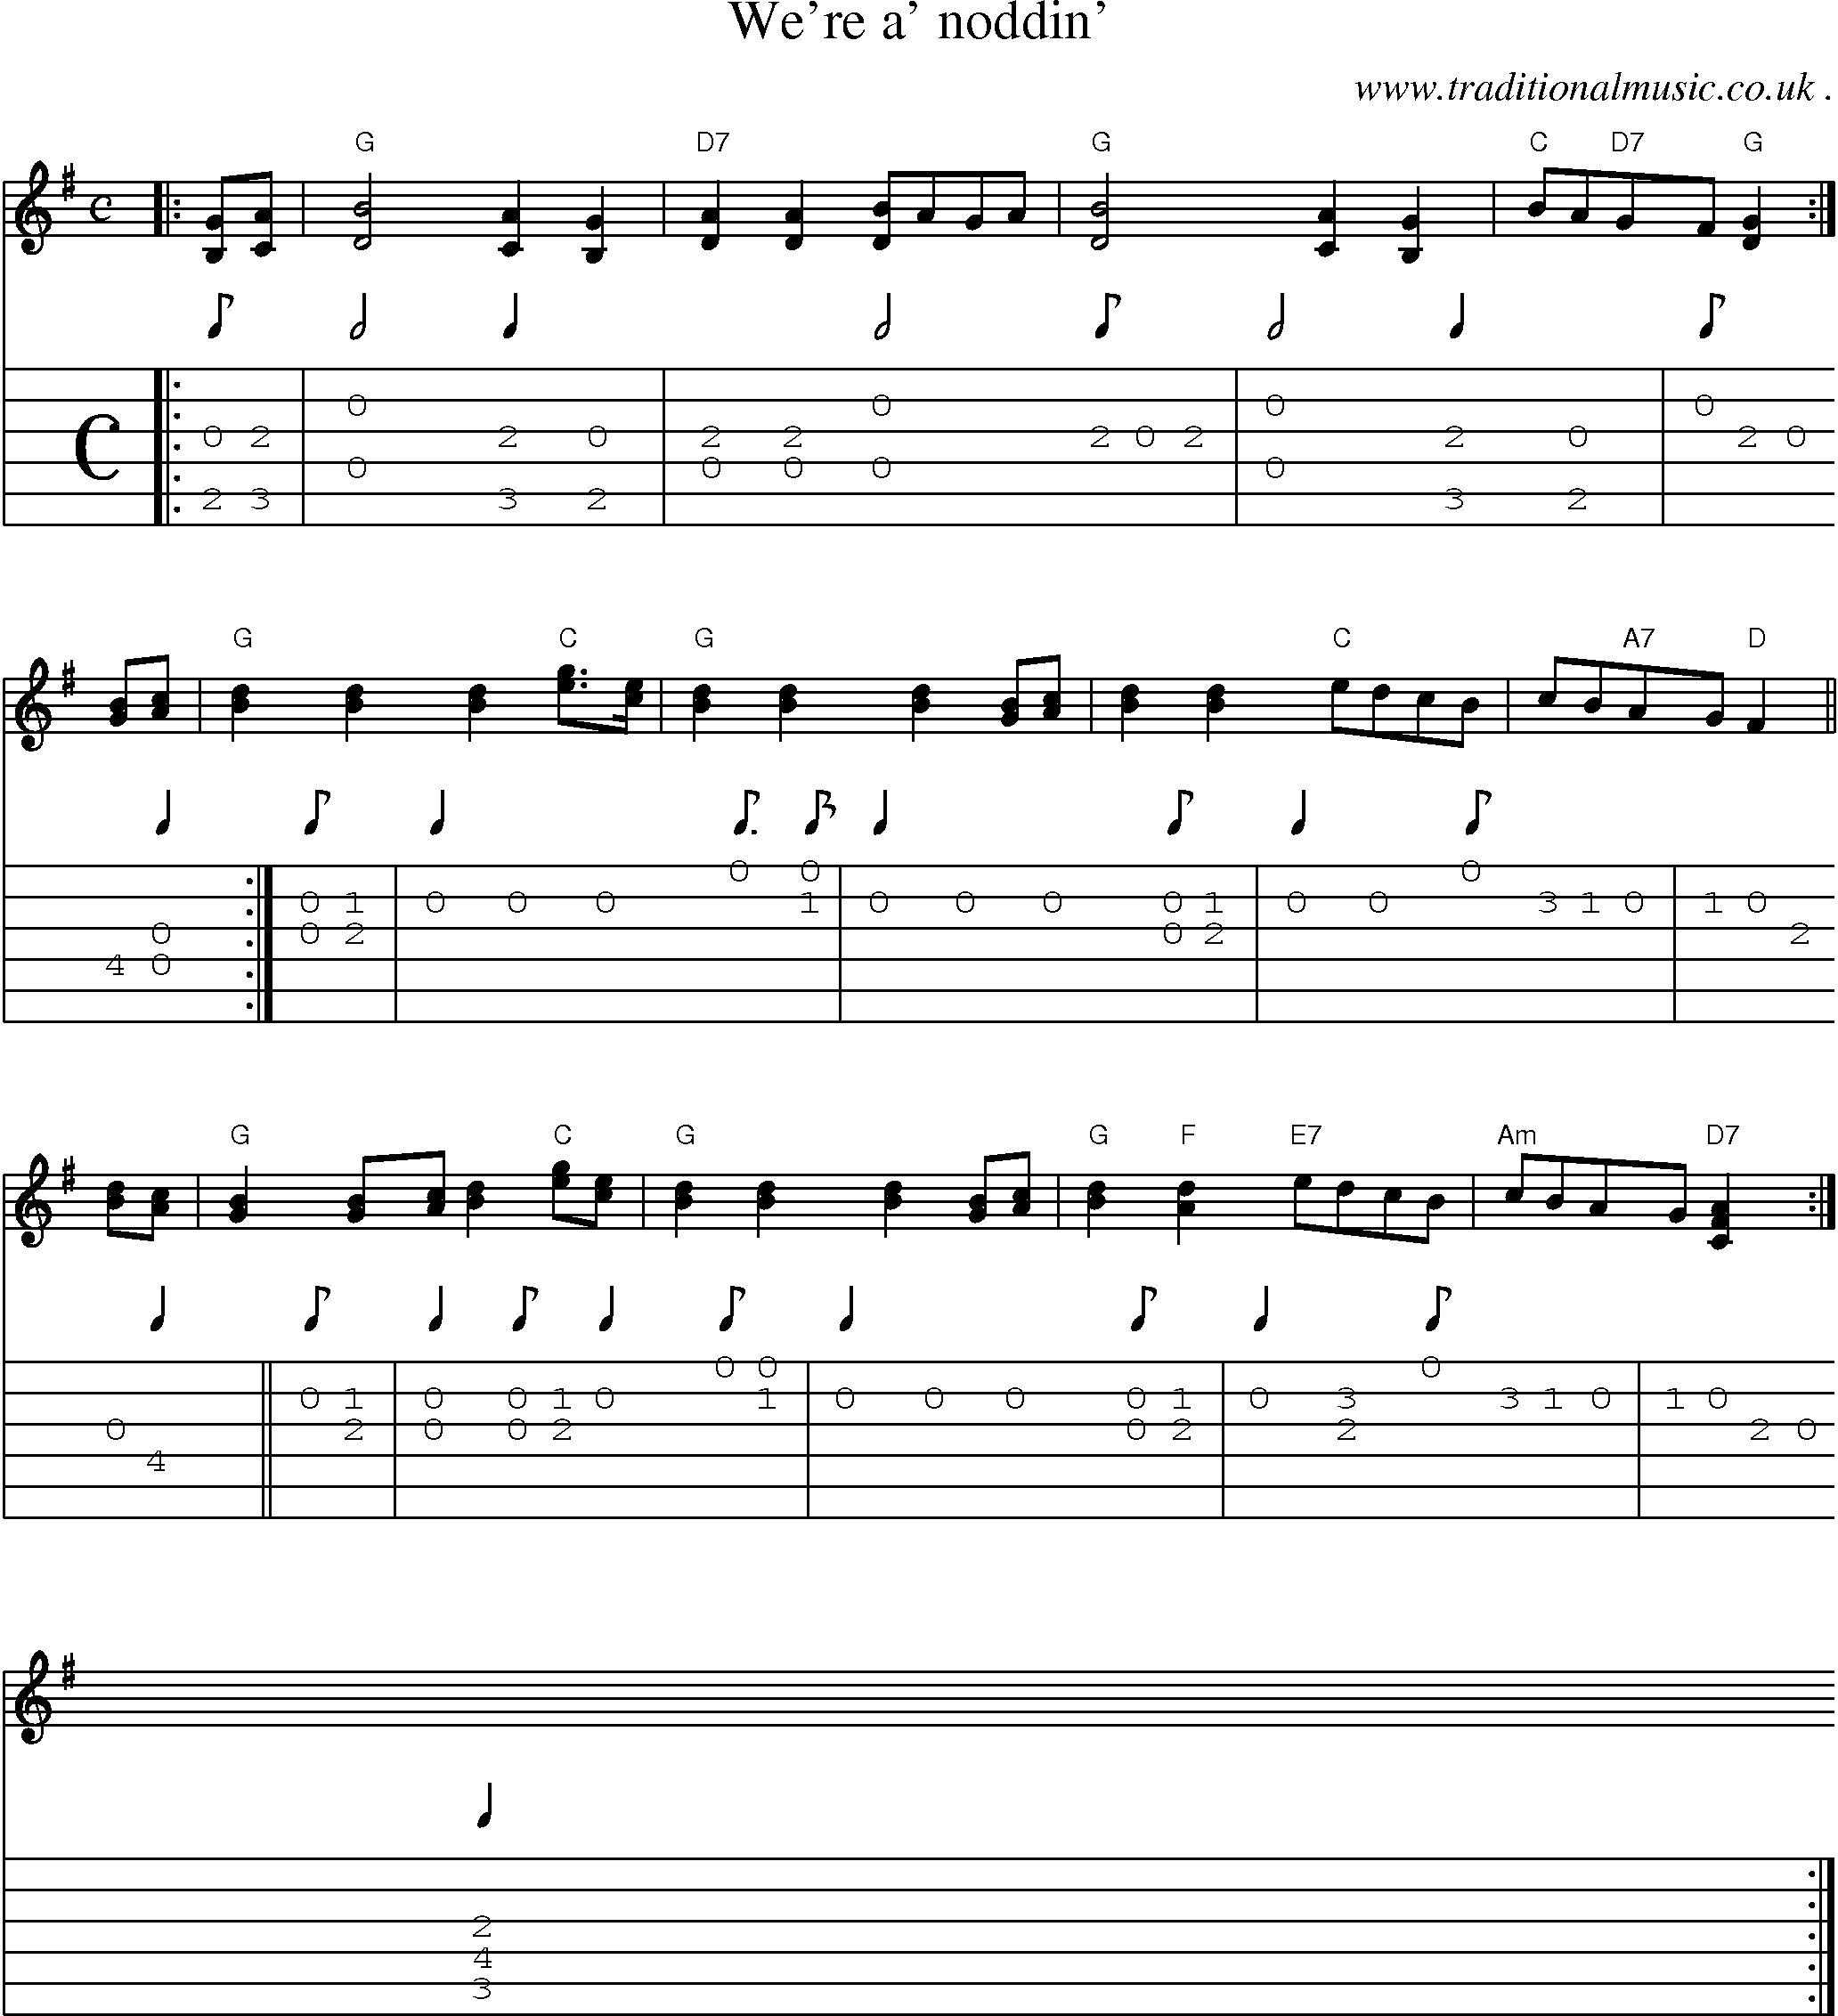 Sheet-music  score, Chords and Guitar Tabs for Were A Noddin